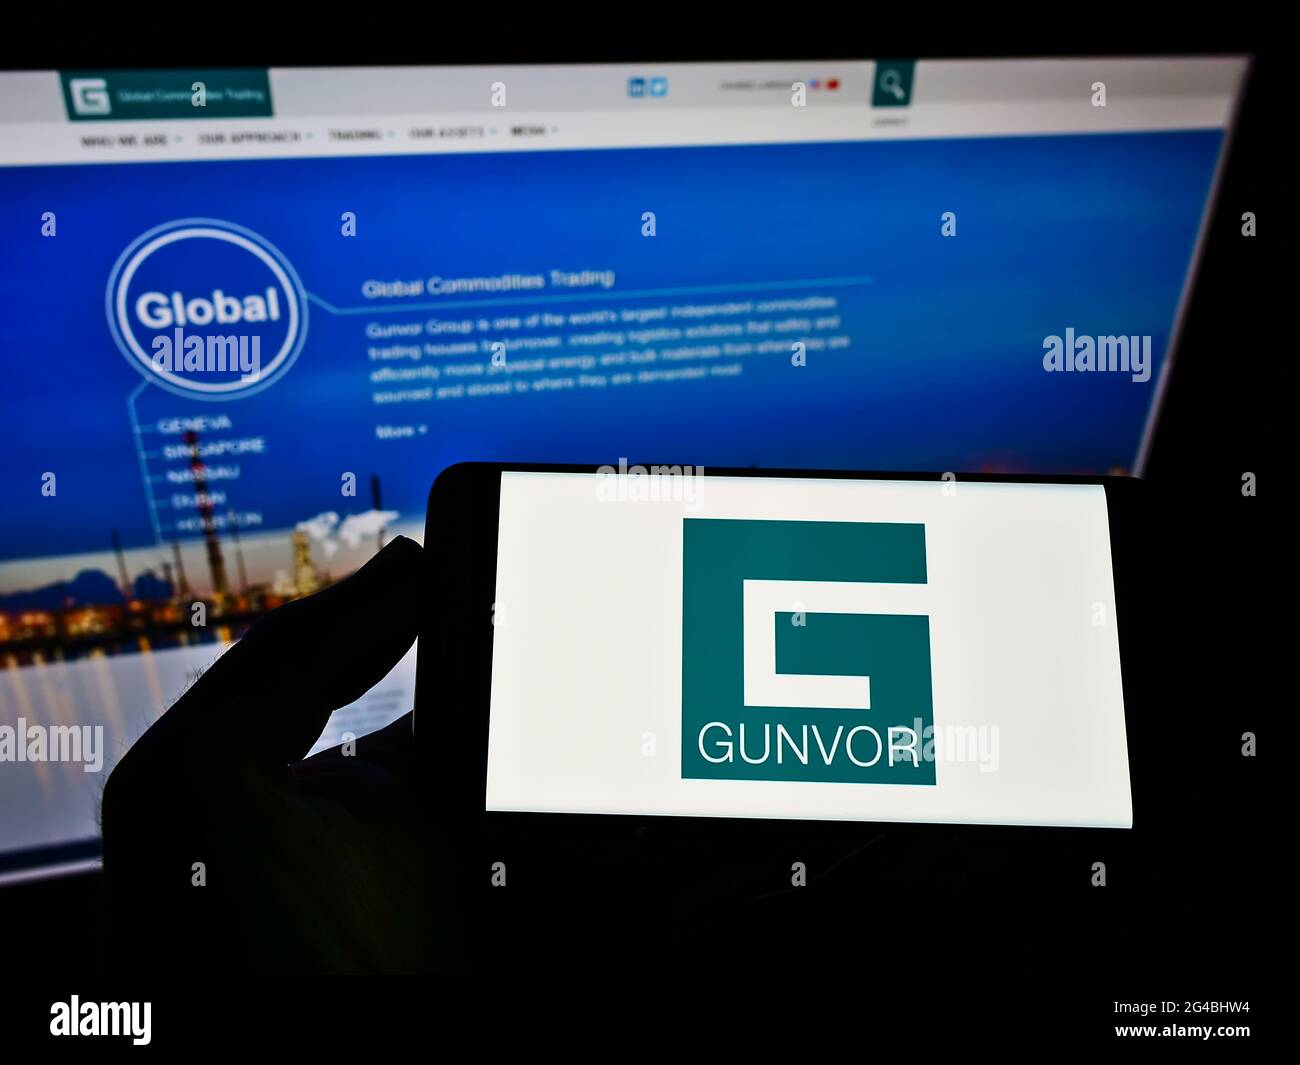 Person holding smartphone with logo of commodity trading company Gunvor Group Ltd on screen in front of website. Focus on phone display. Stock Photo